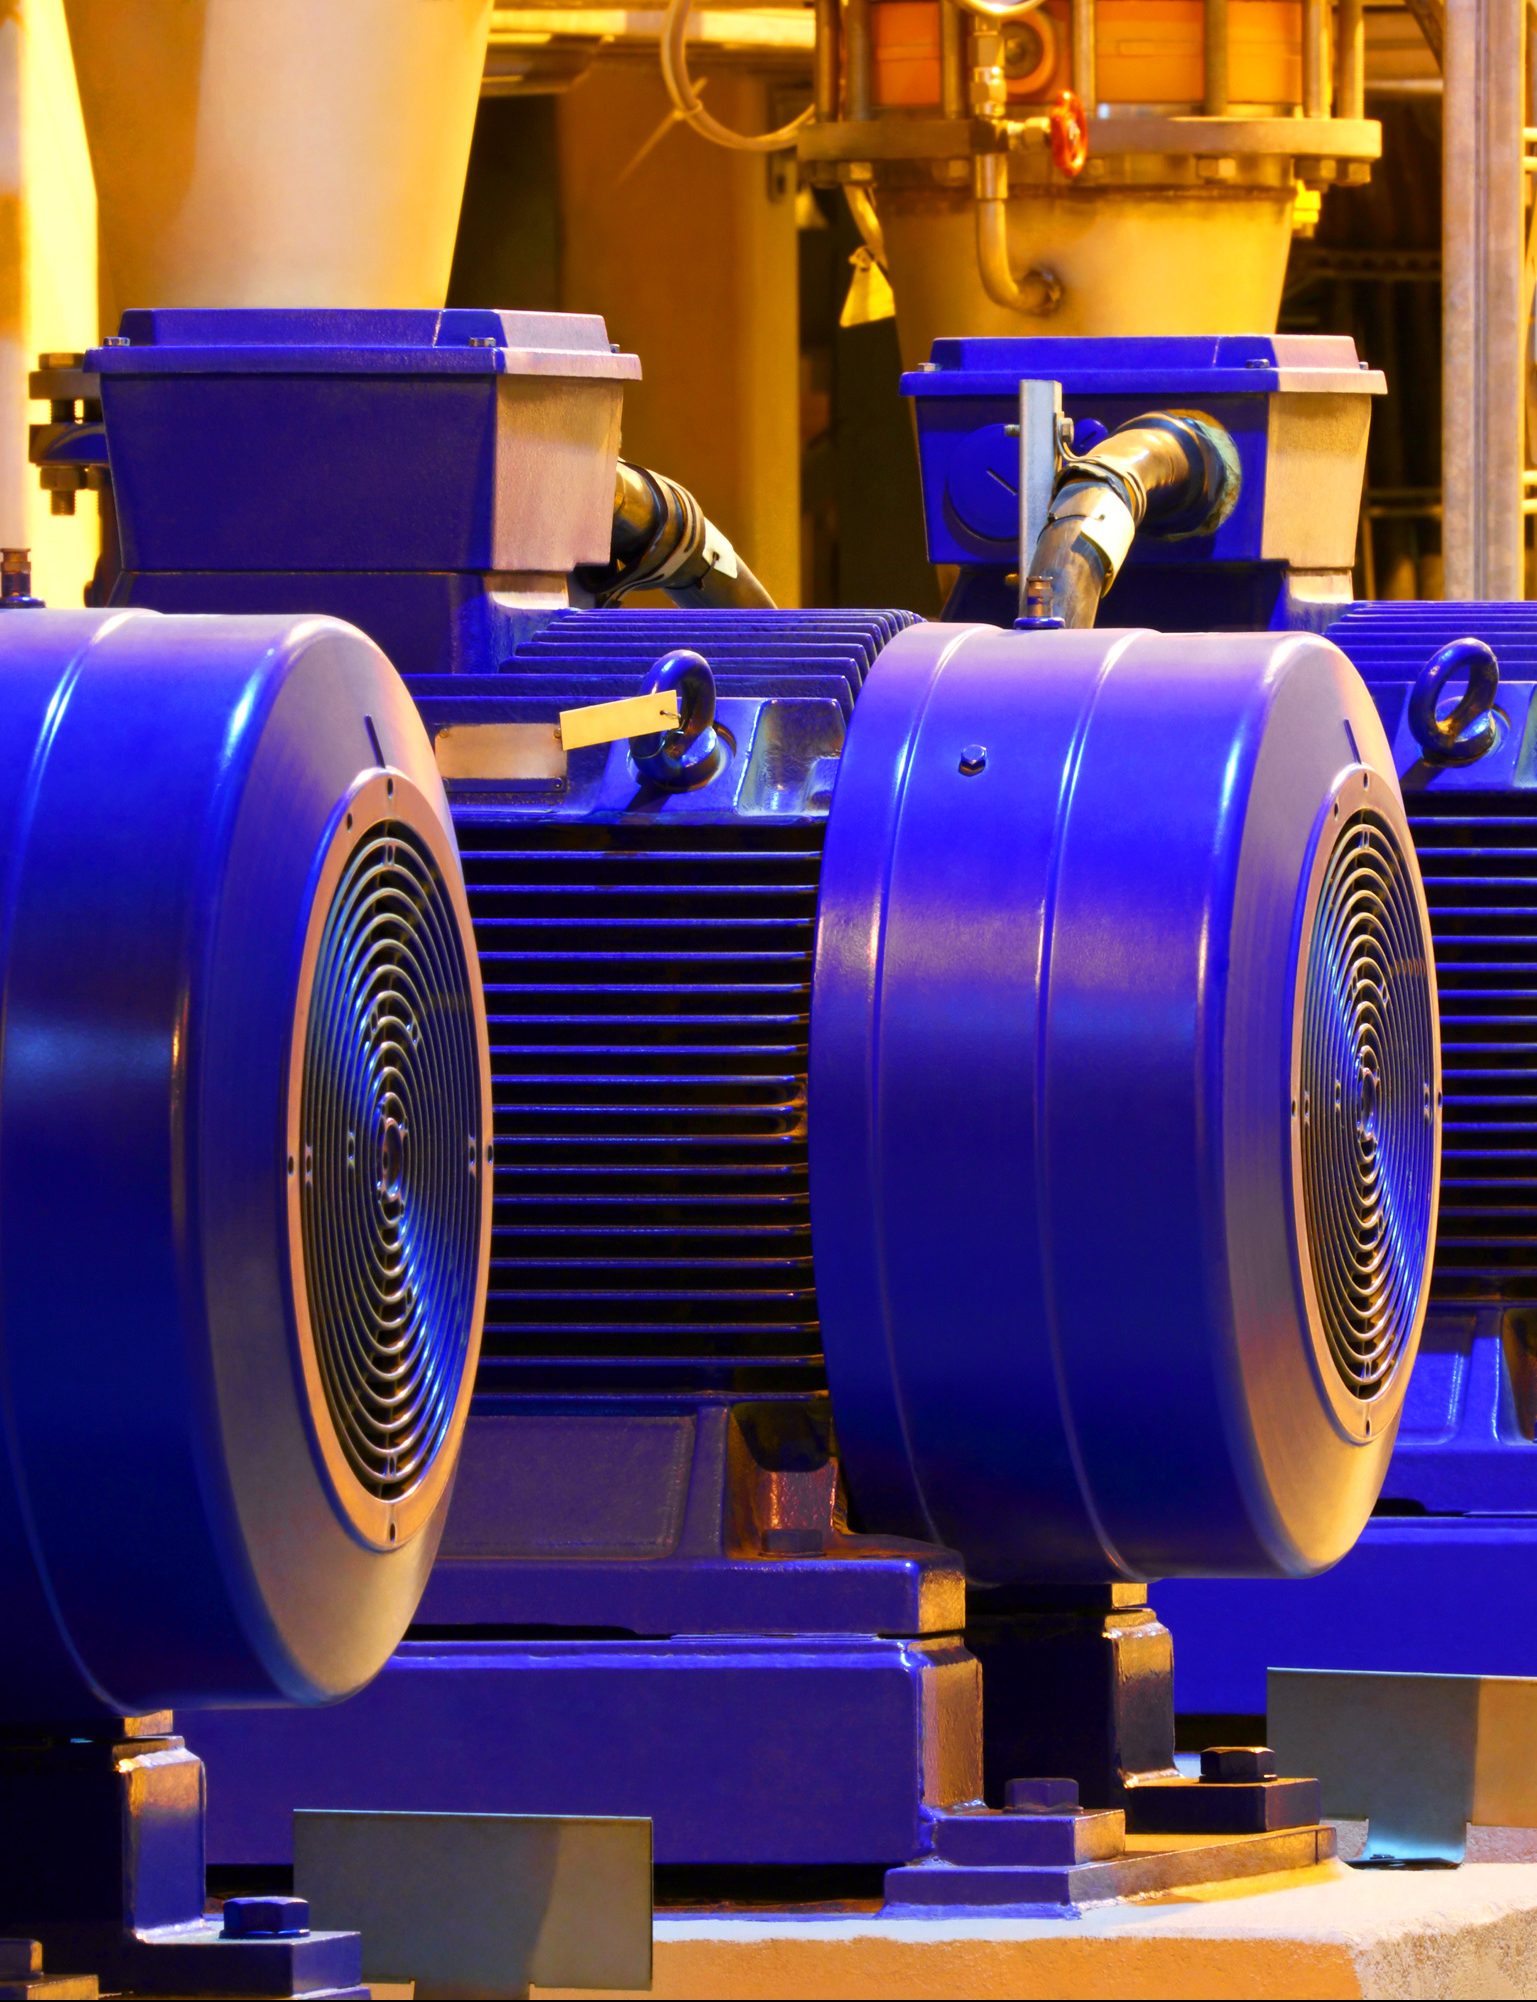 Factory motor equipment.Industrial business and technologies.